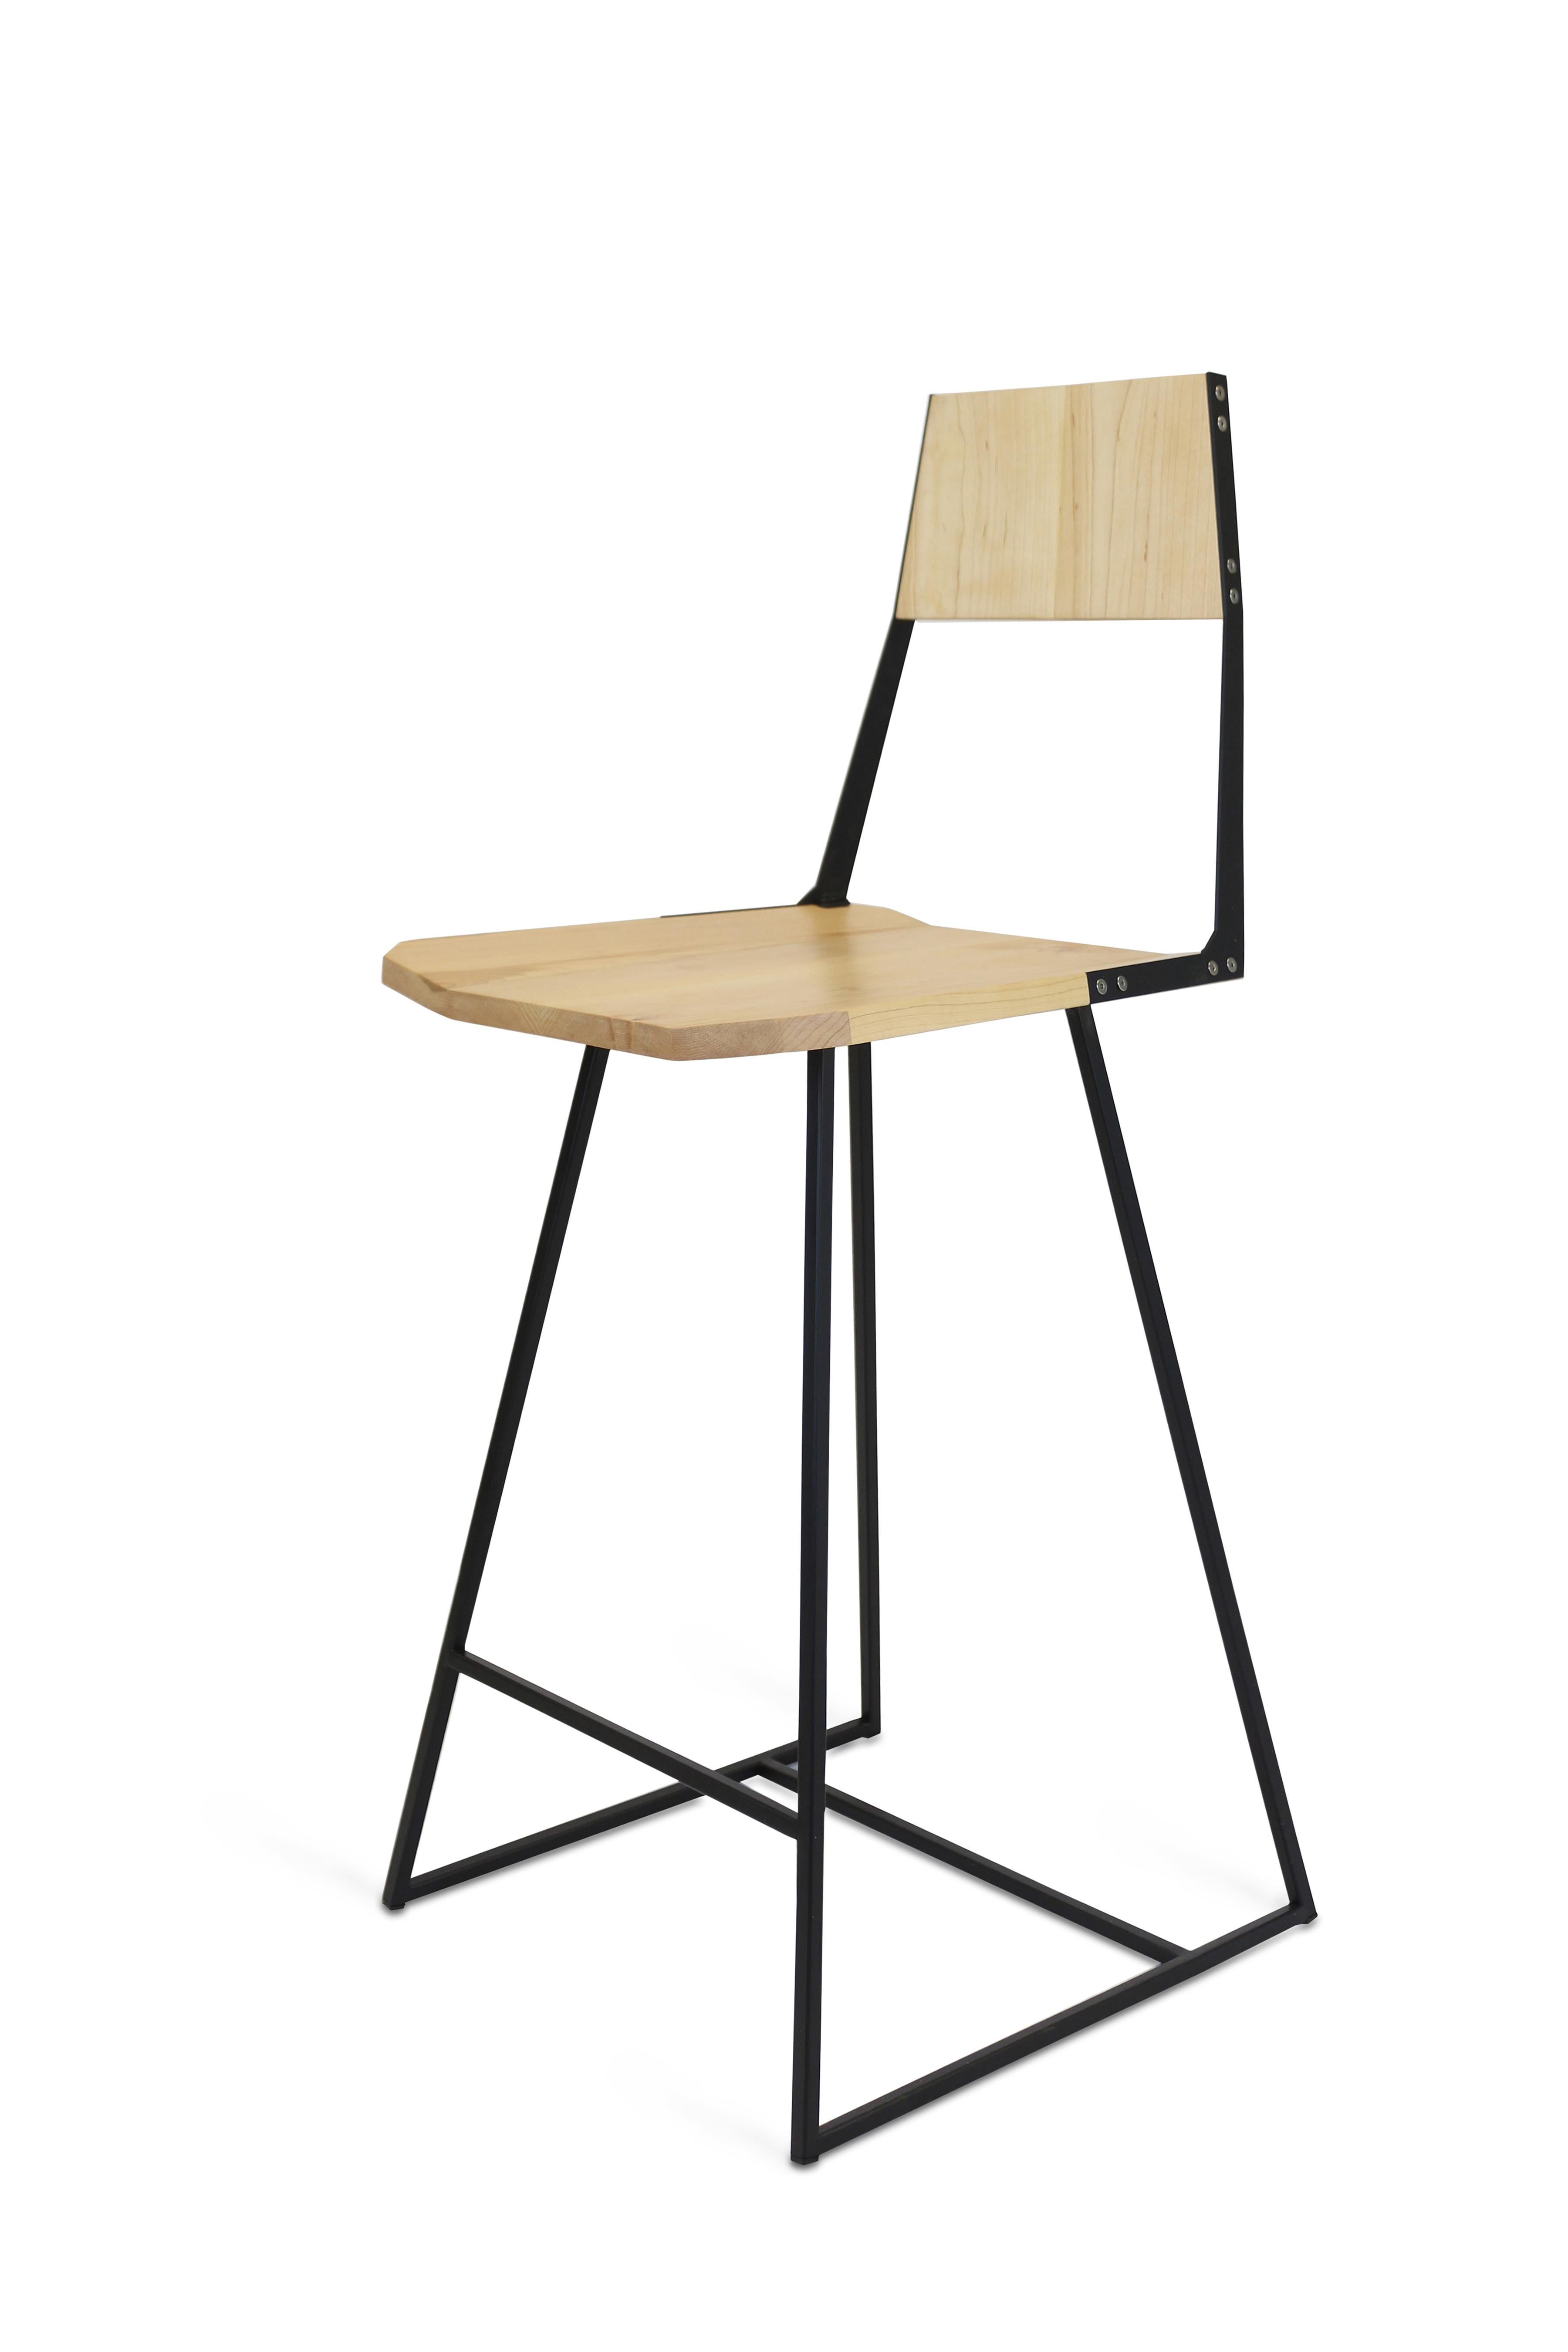 A perfect mix of Scandinavian inspiration and industrial flare that cohesively come together to make a statement piece which embodies simplicity, functionality and elegance.
 
The Clarkester is constructed of solid wood (American Walnut or Maple)